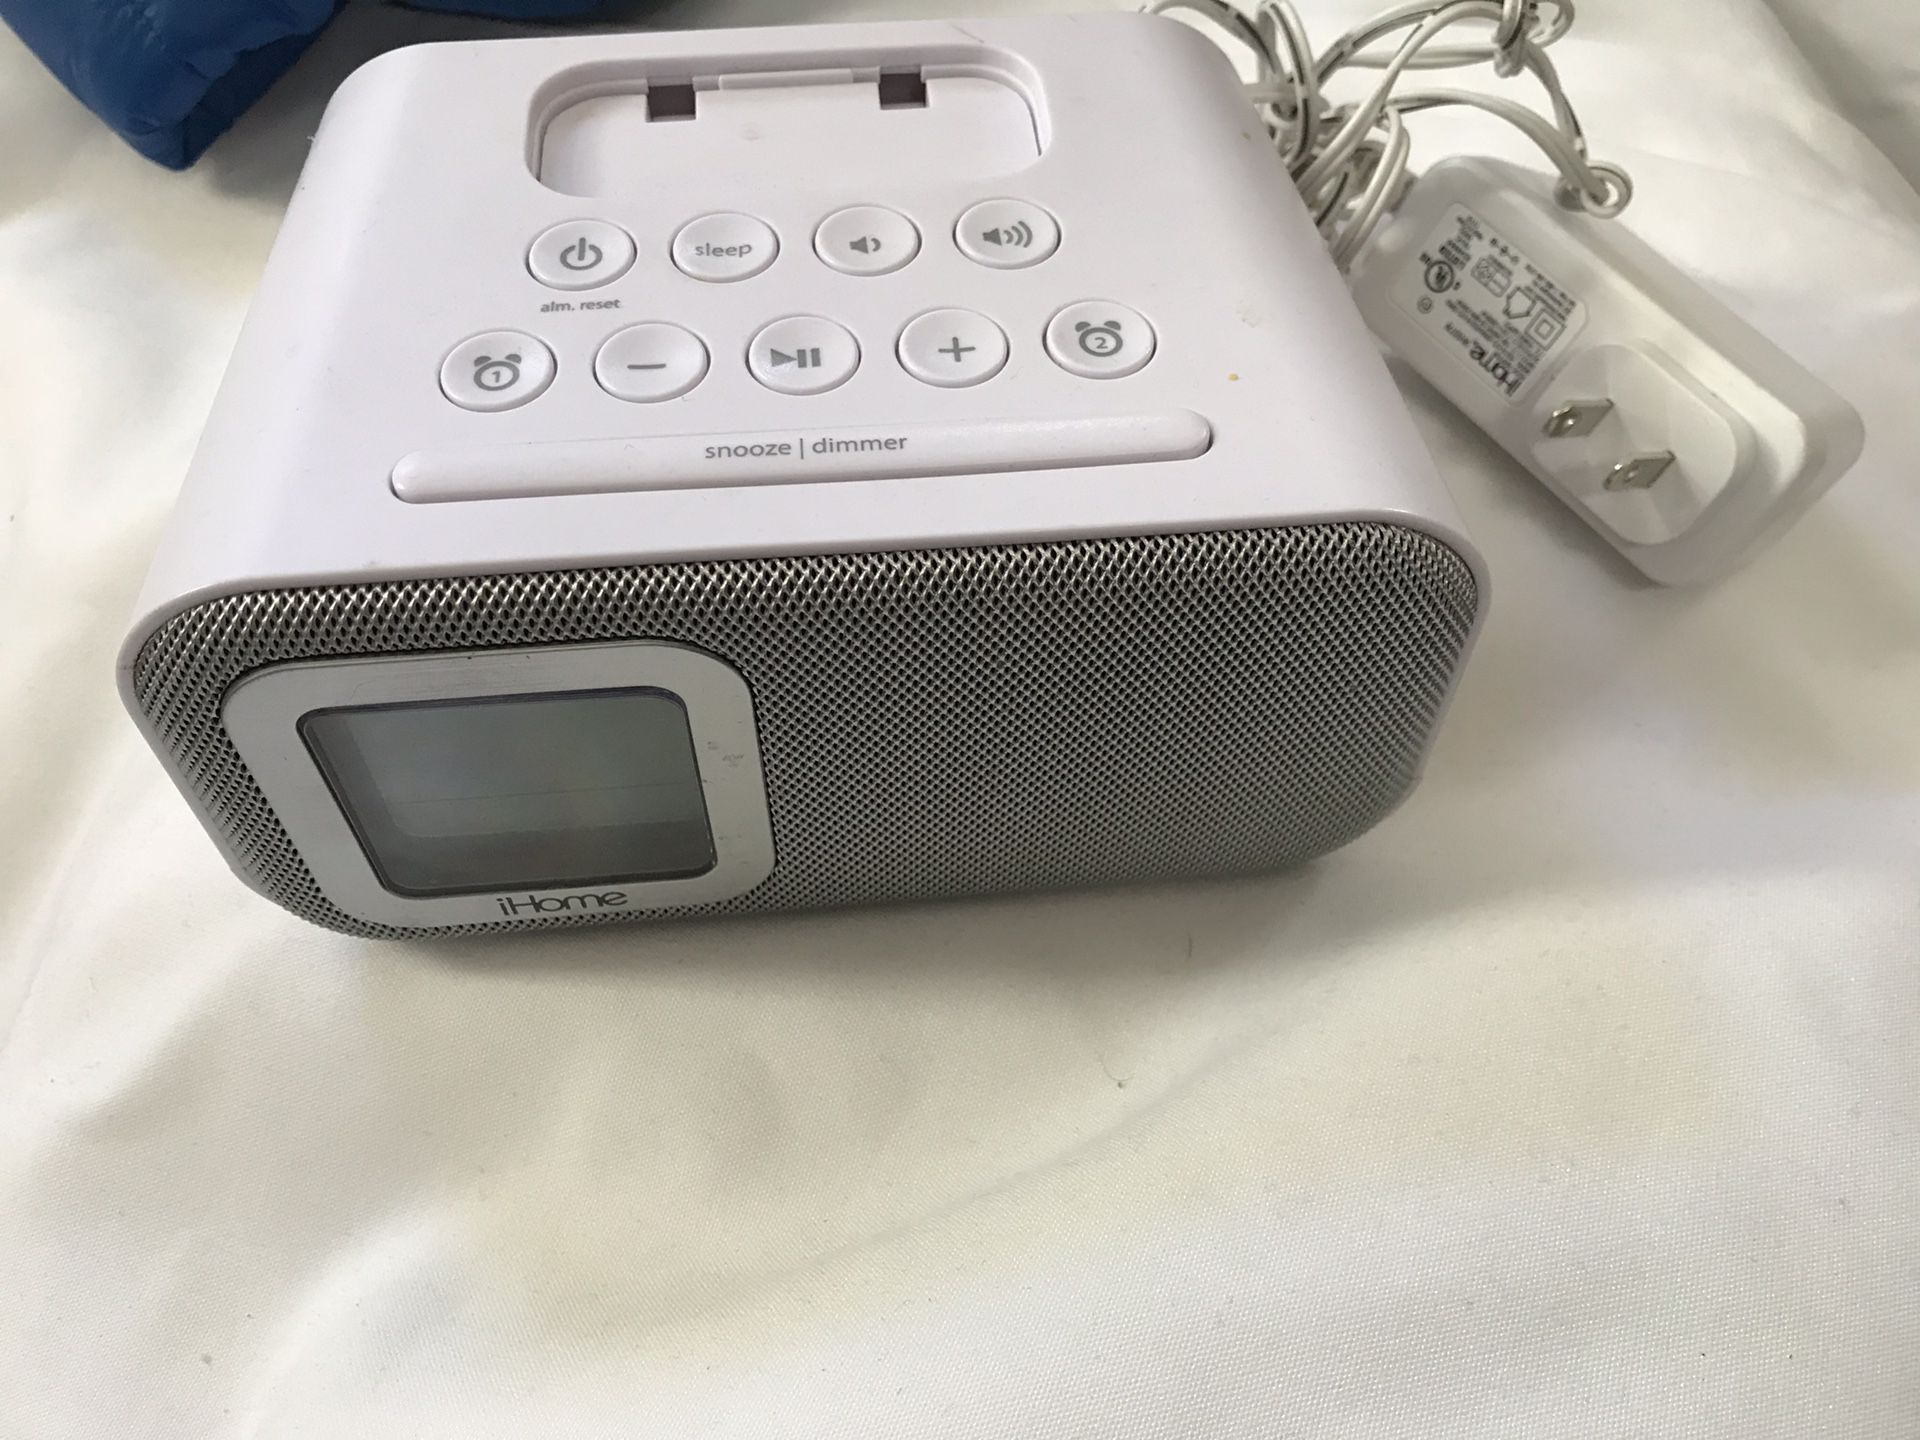 IHOME BLUETOOTH SPEAKER with DUAl ARALM, USB CHARGER and LINE-IN